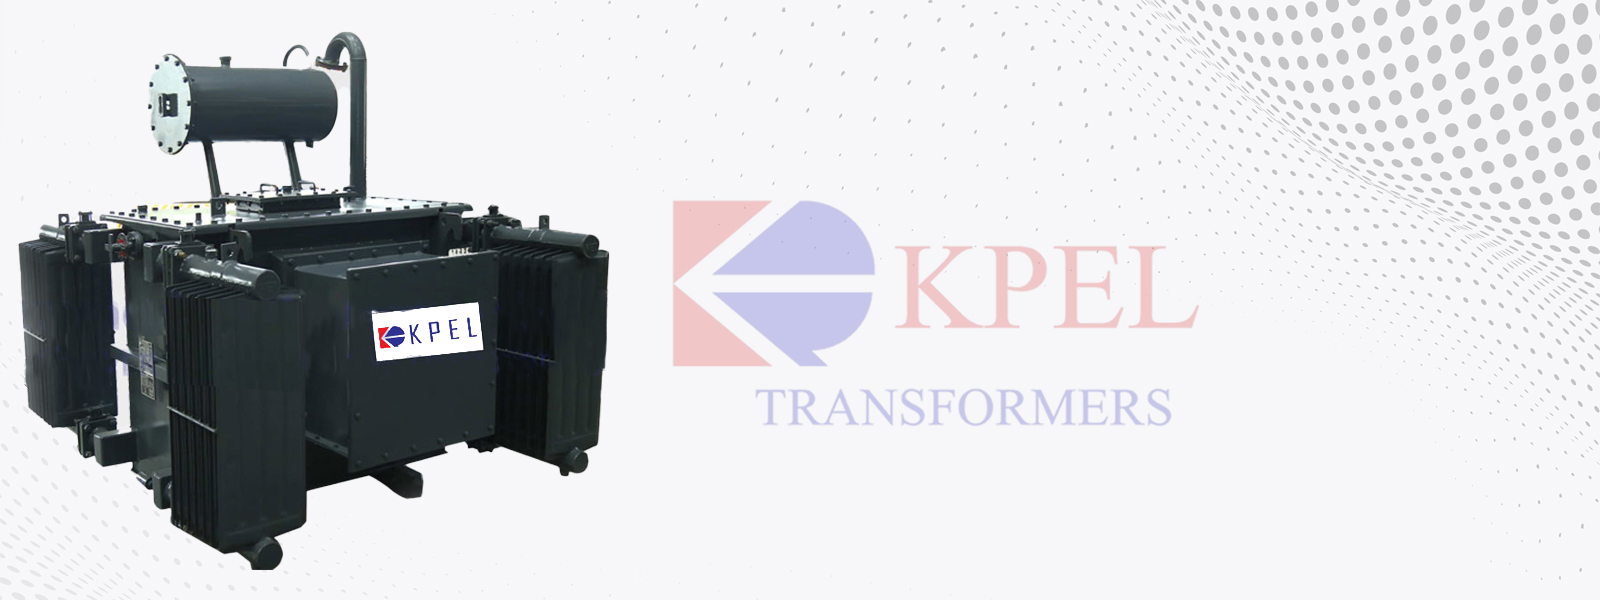 Best Transformers Manufacturing Company in Telangana